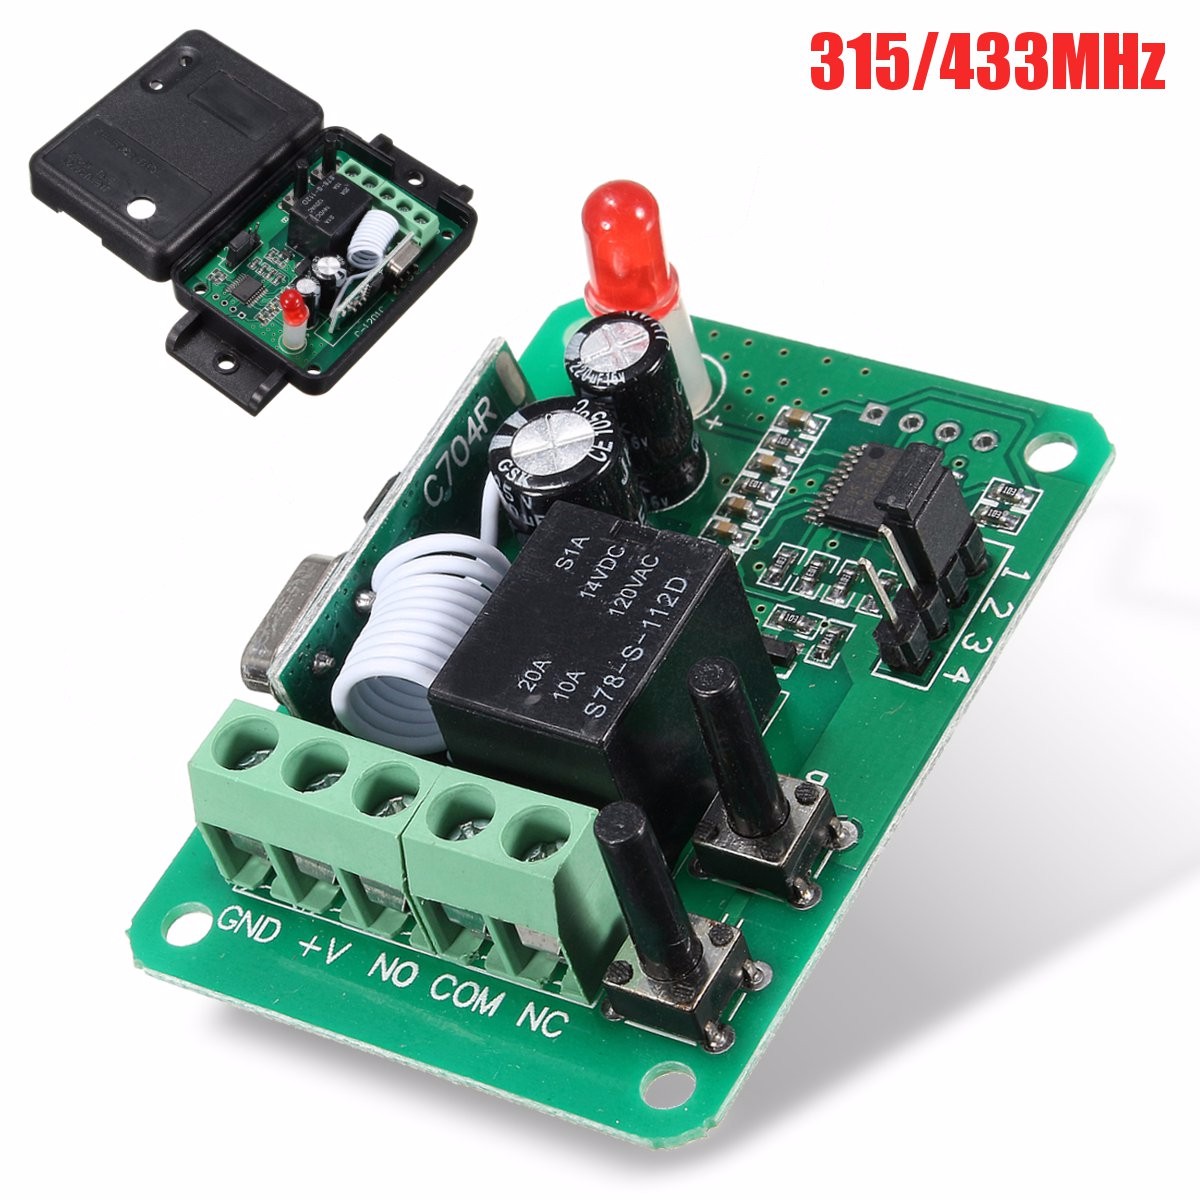 DC12V-1CH-315433MHz-Wireless-Time-Delay-Relay-RF-Remote-Control-Switch-Receiver-1150044-5